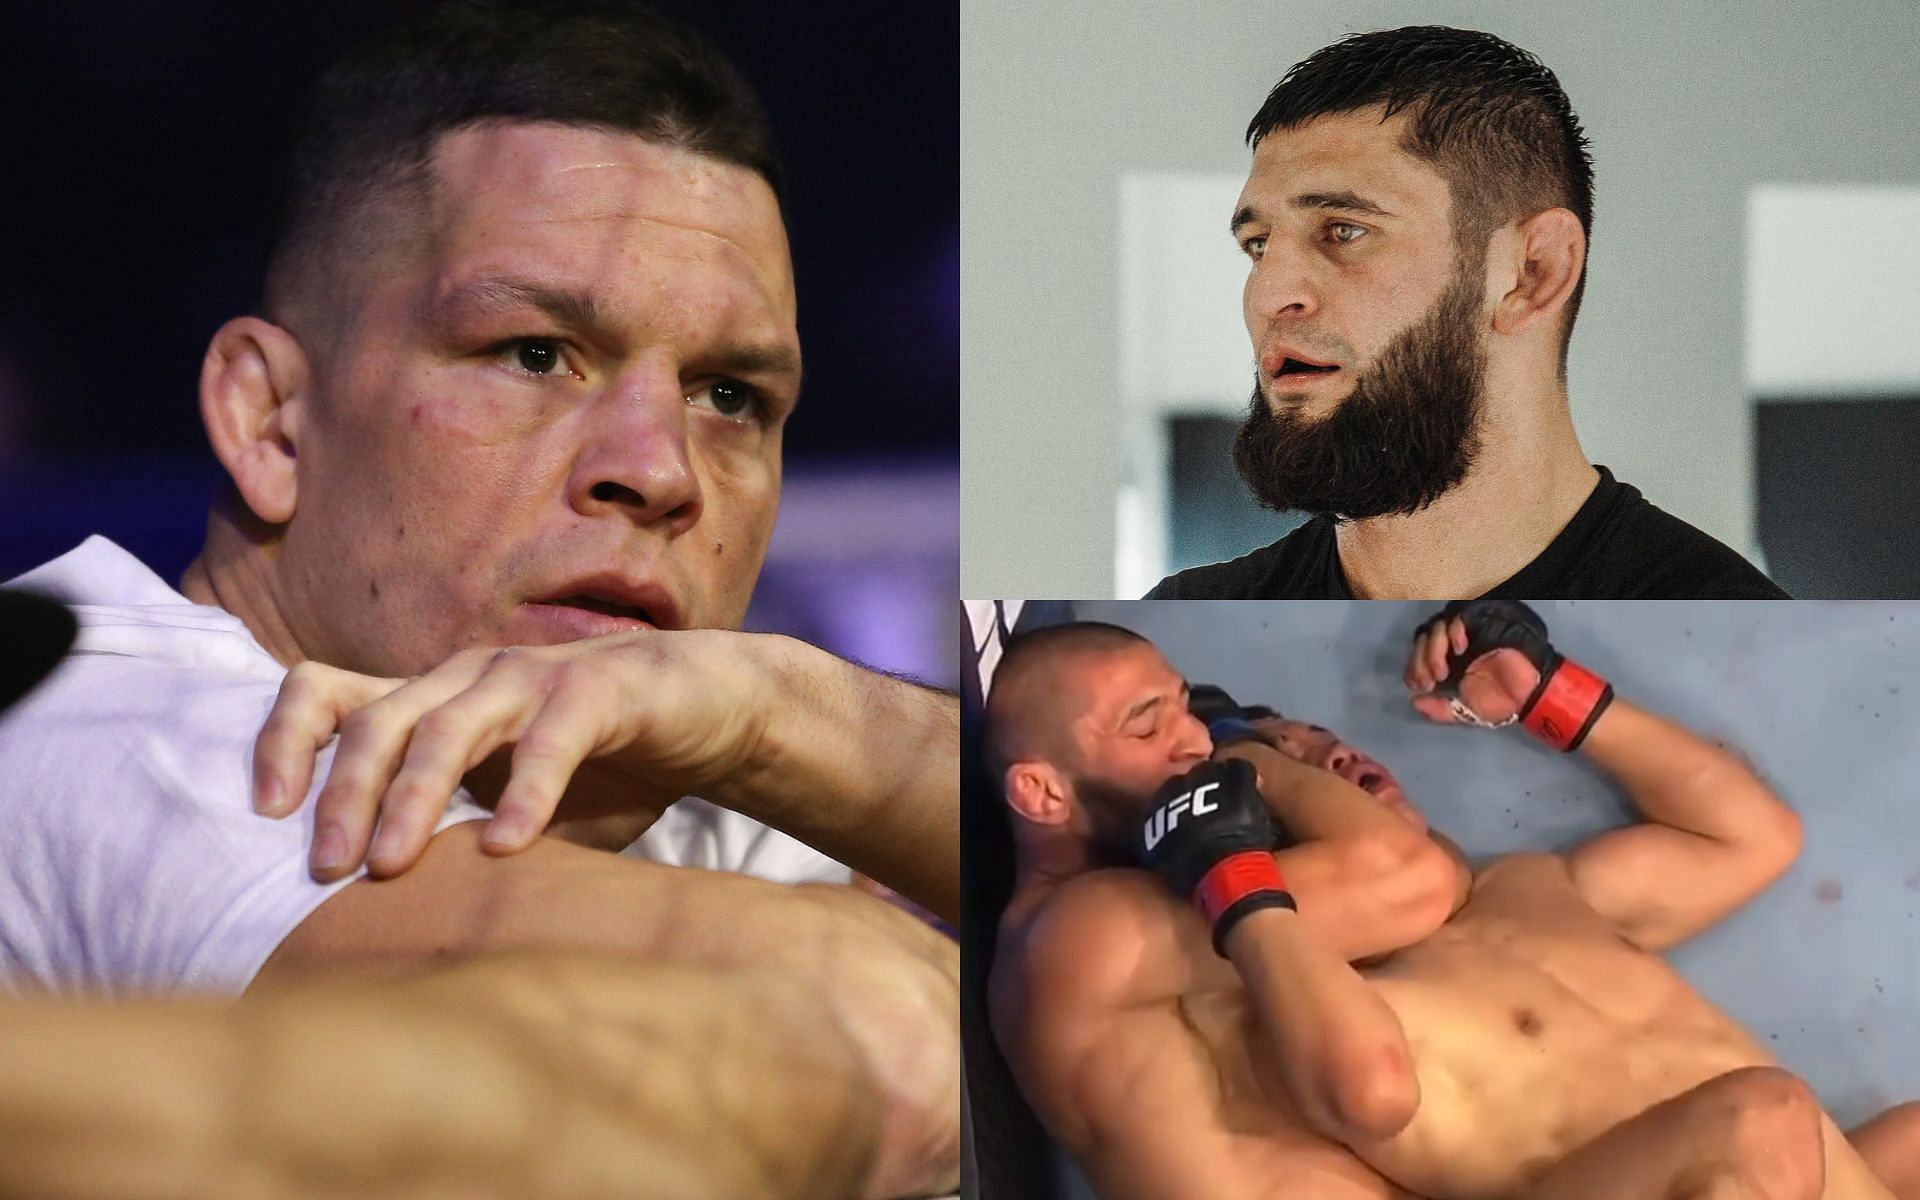 Nate Diaz (left, image courtesy of Getty); Khamzat Chimaev and Chimaev vs. Jingliang (top and bottom right, images courtesy of @khamzat_chimaev Instagram)